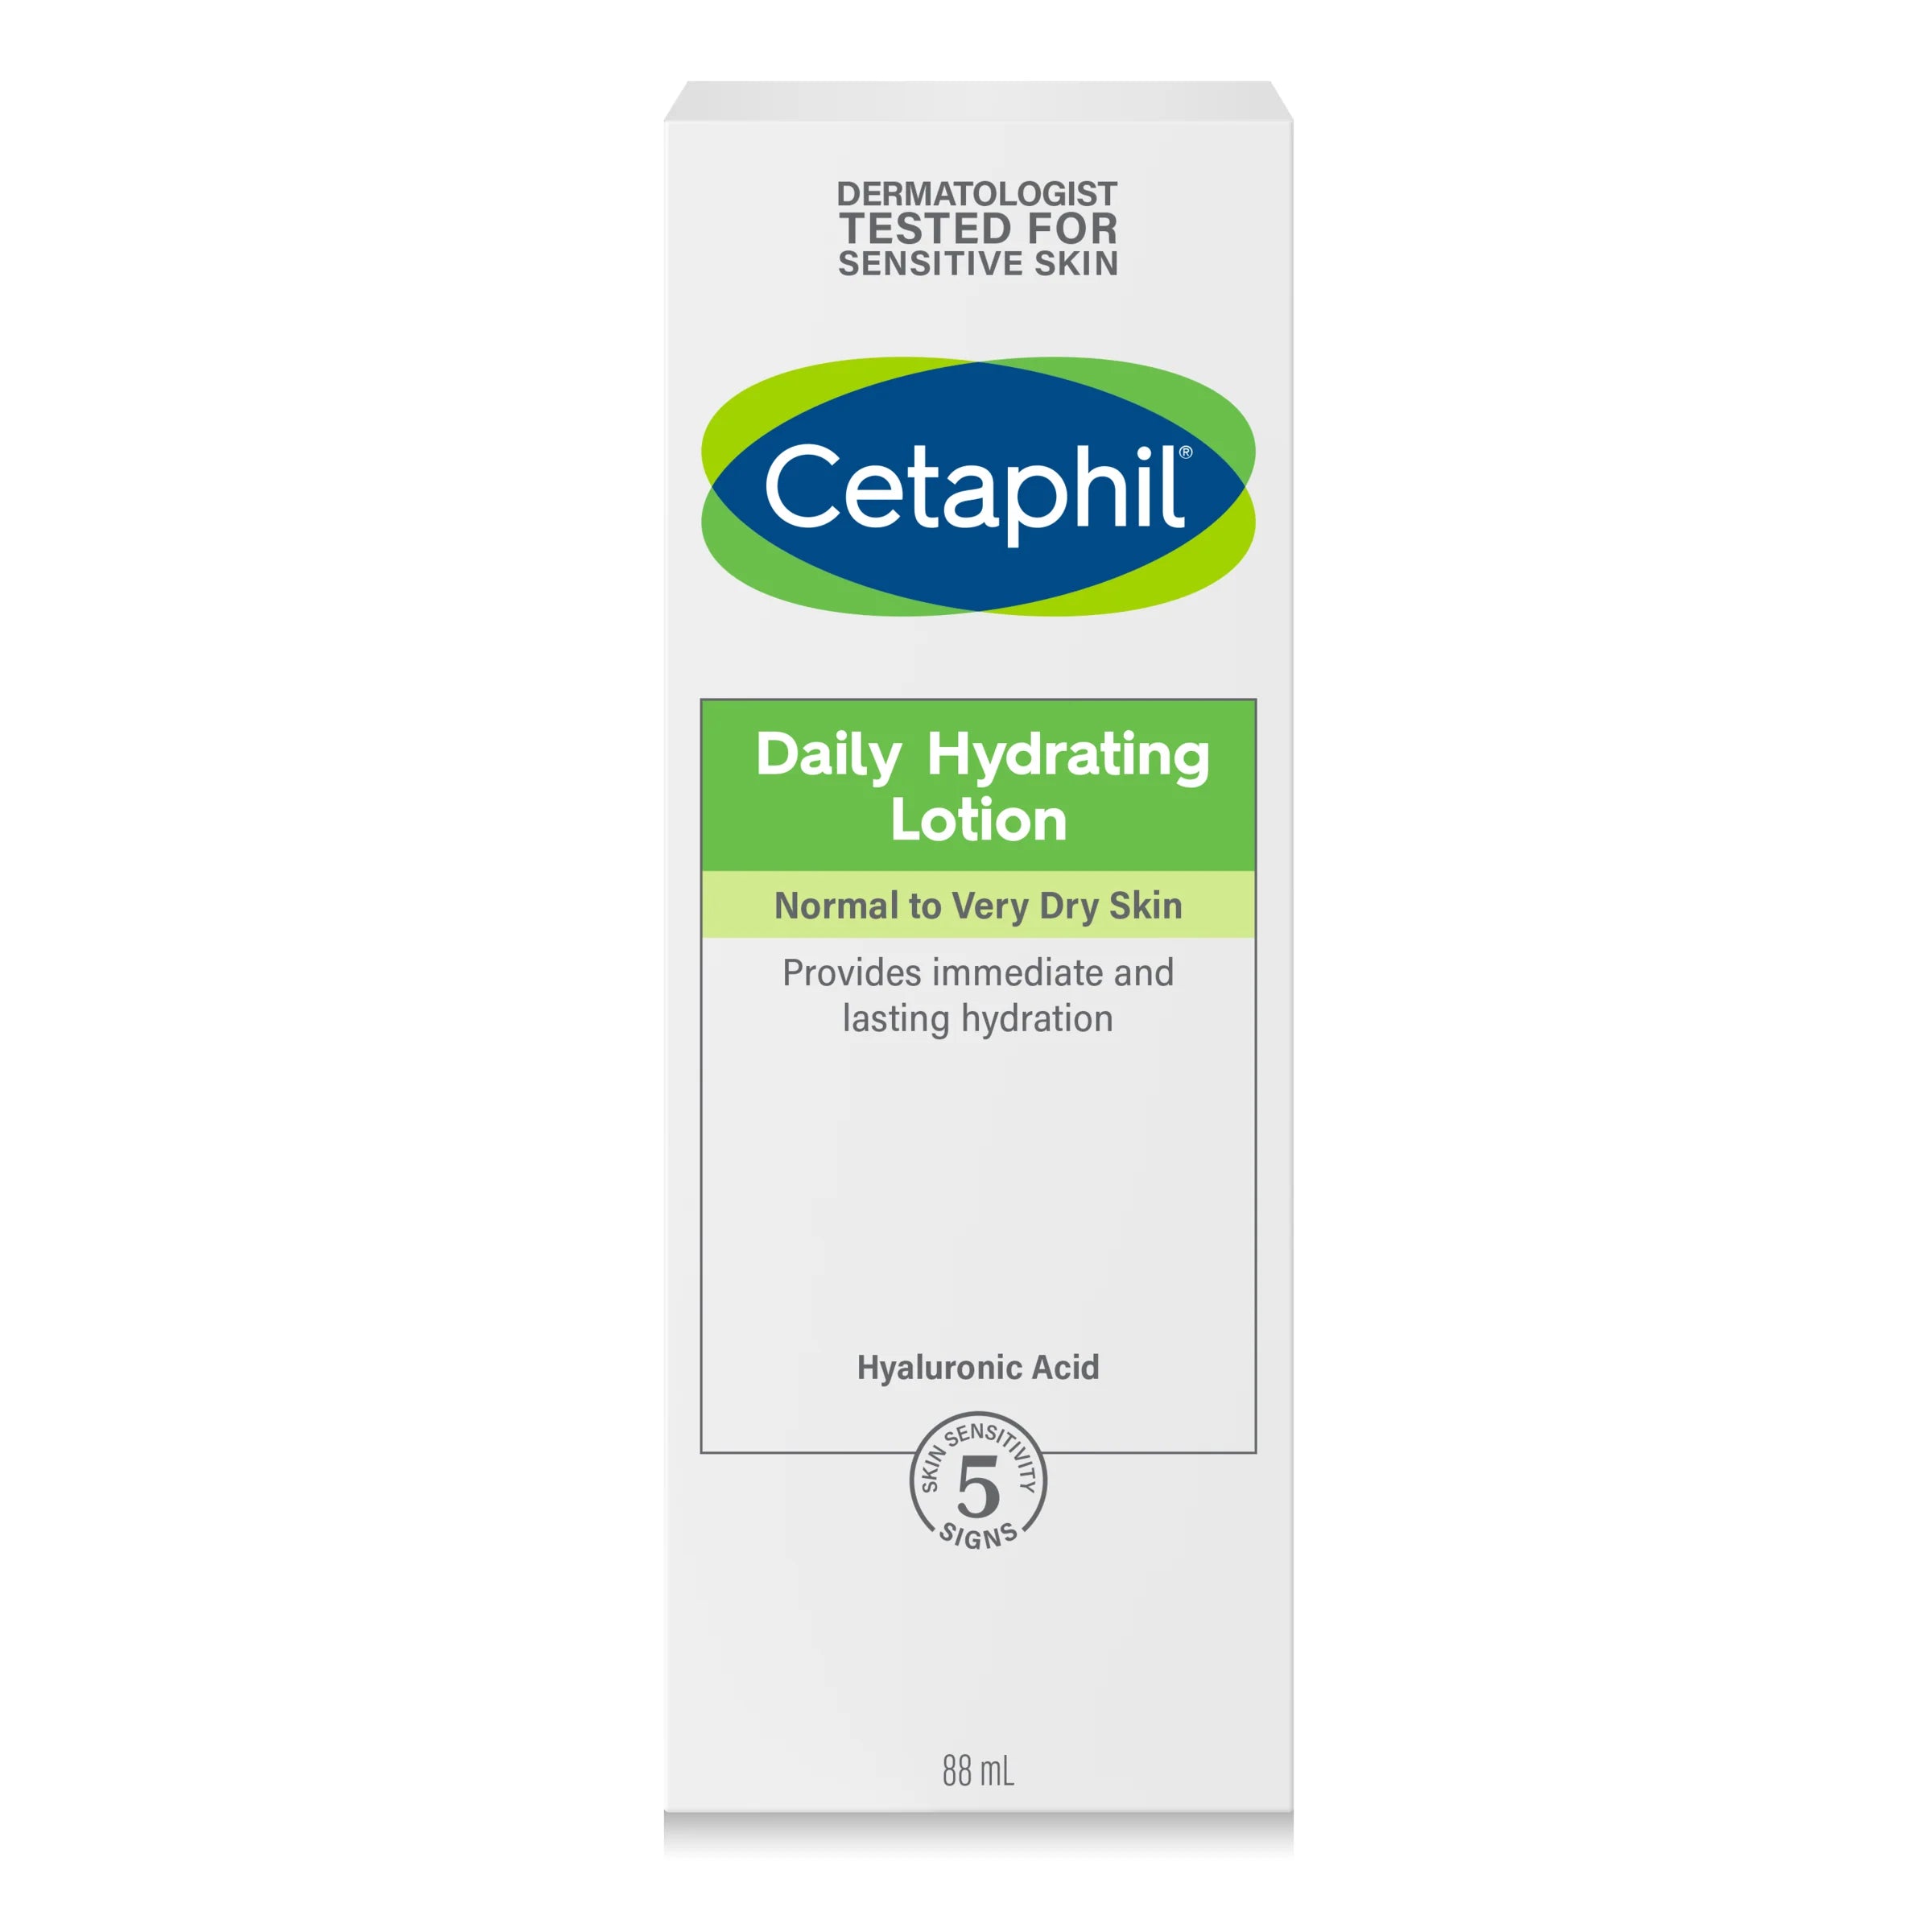 Cetaphil Daily Hydration Lotion with Hyaluronic Acid